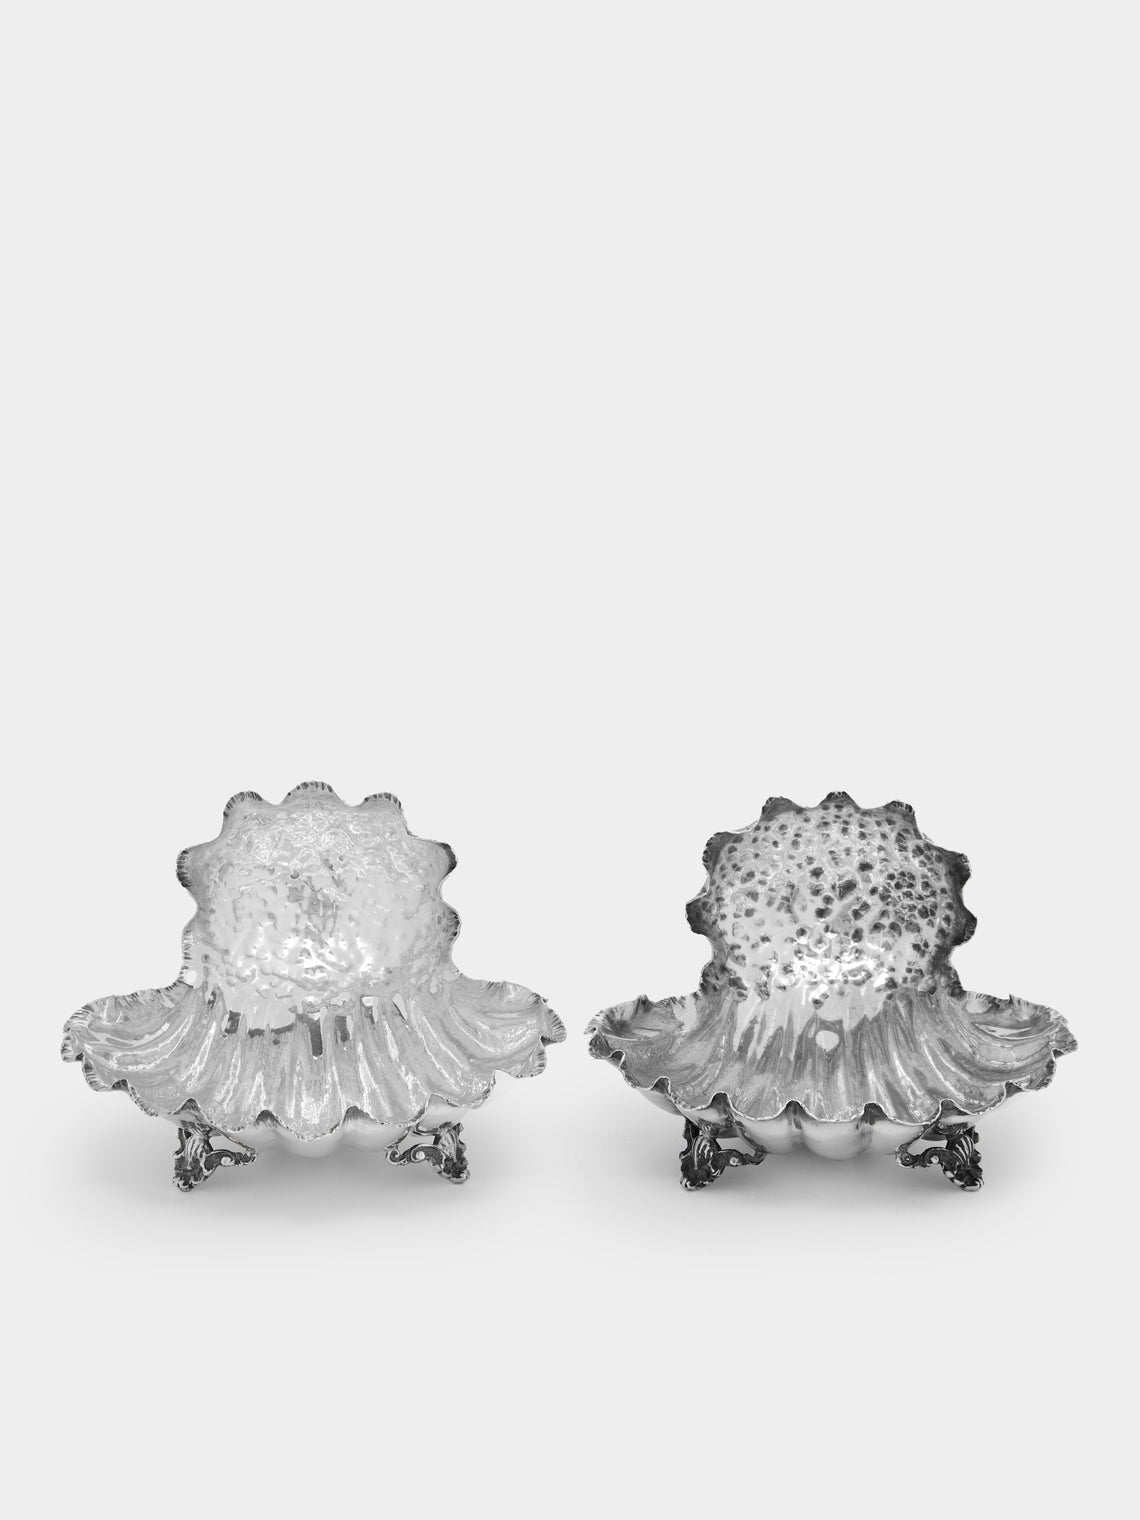 Antique and Vintage - 1940s Solid Silver Shell Dishes (Set of 2) -  - ABASK - 